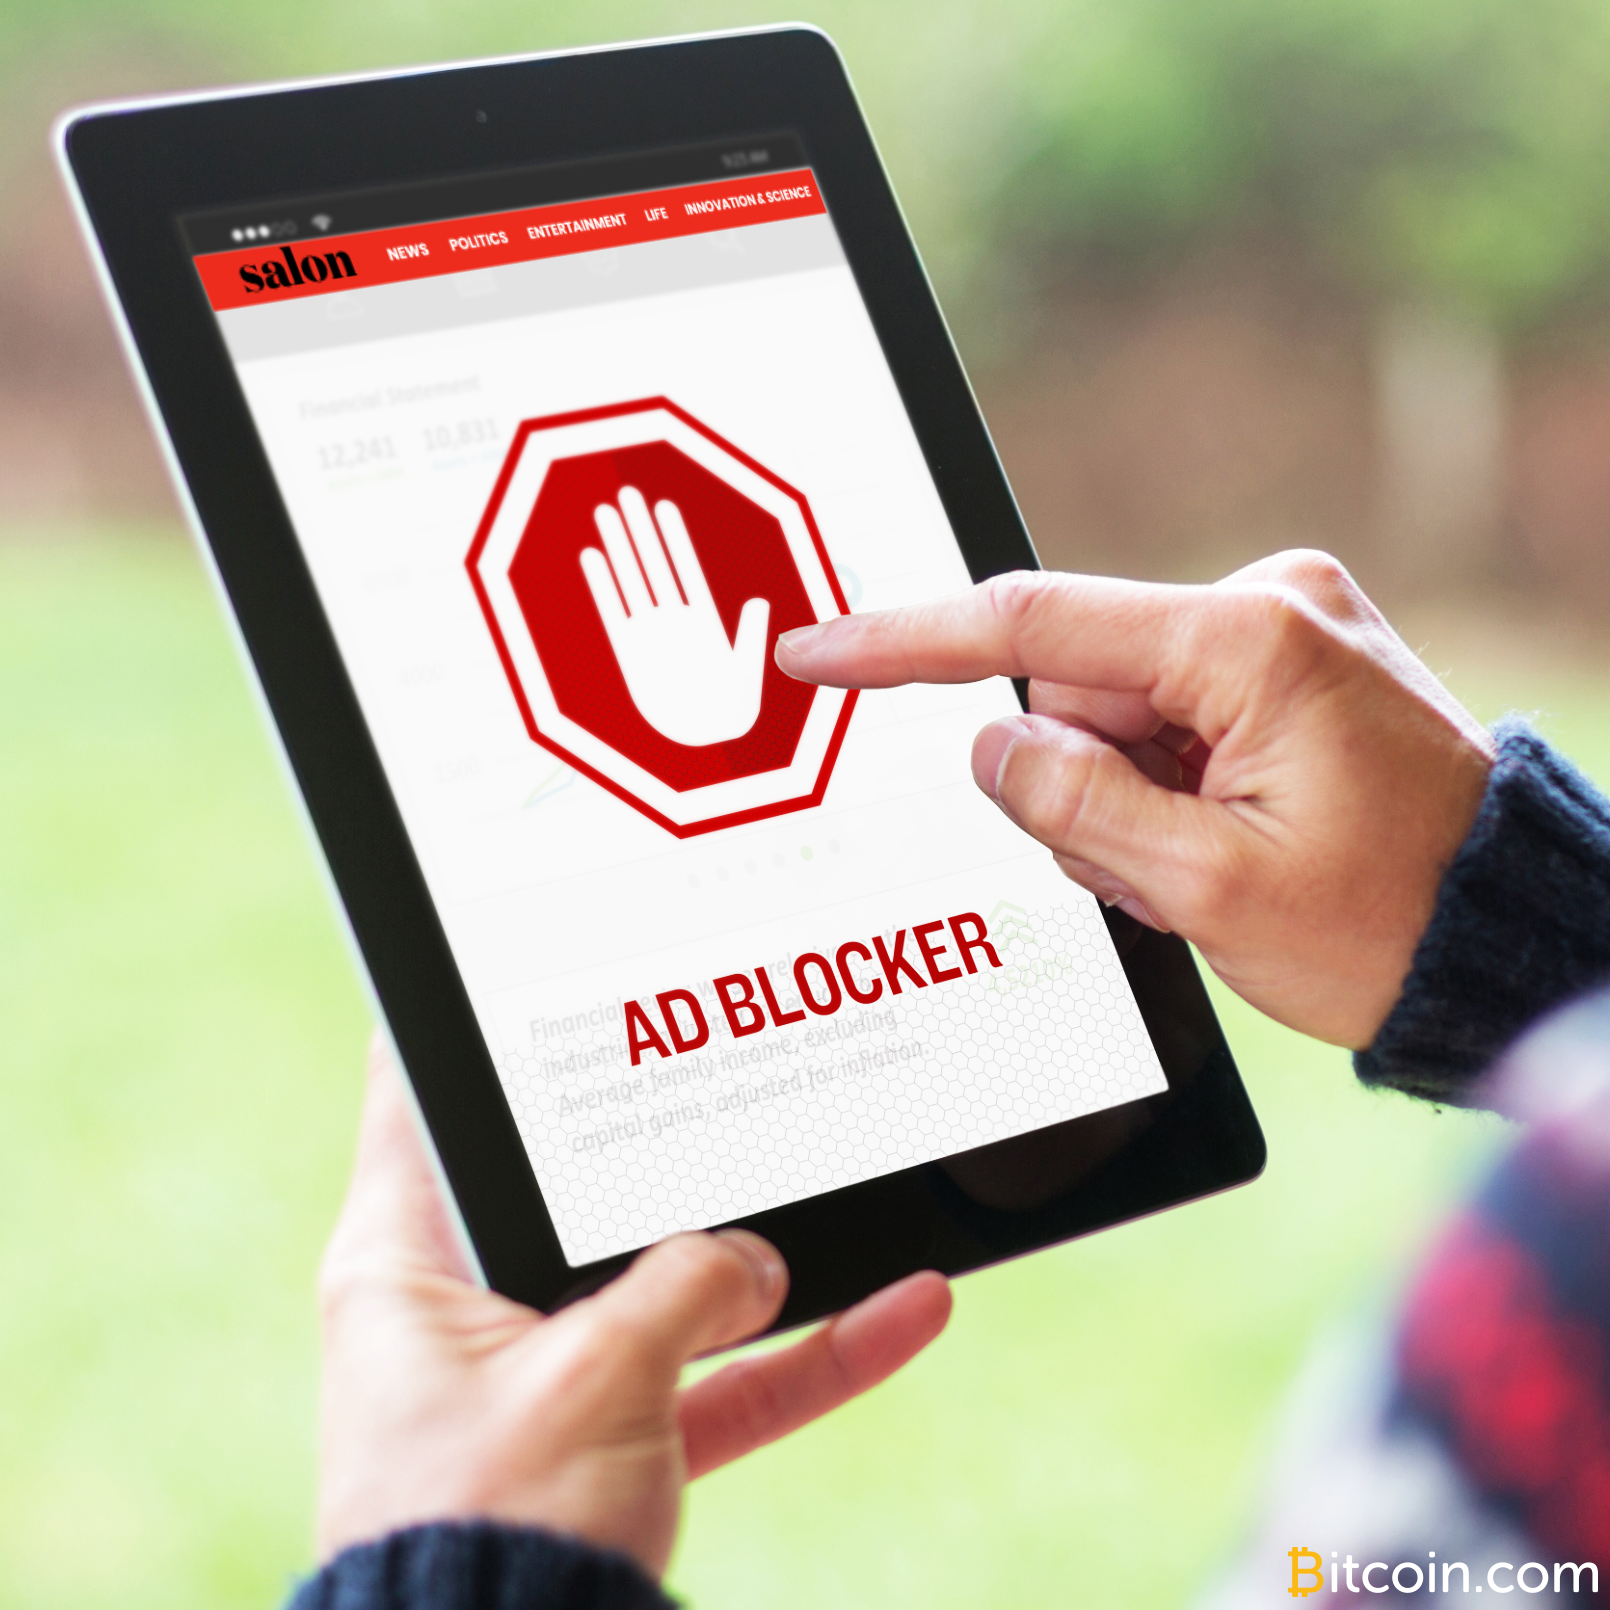 Salon Offers Visitors Cryptocurrency Mining to Block Ads